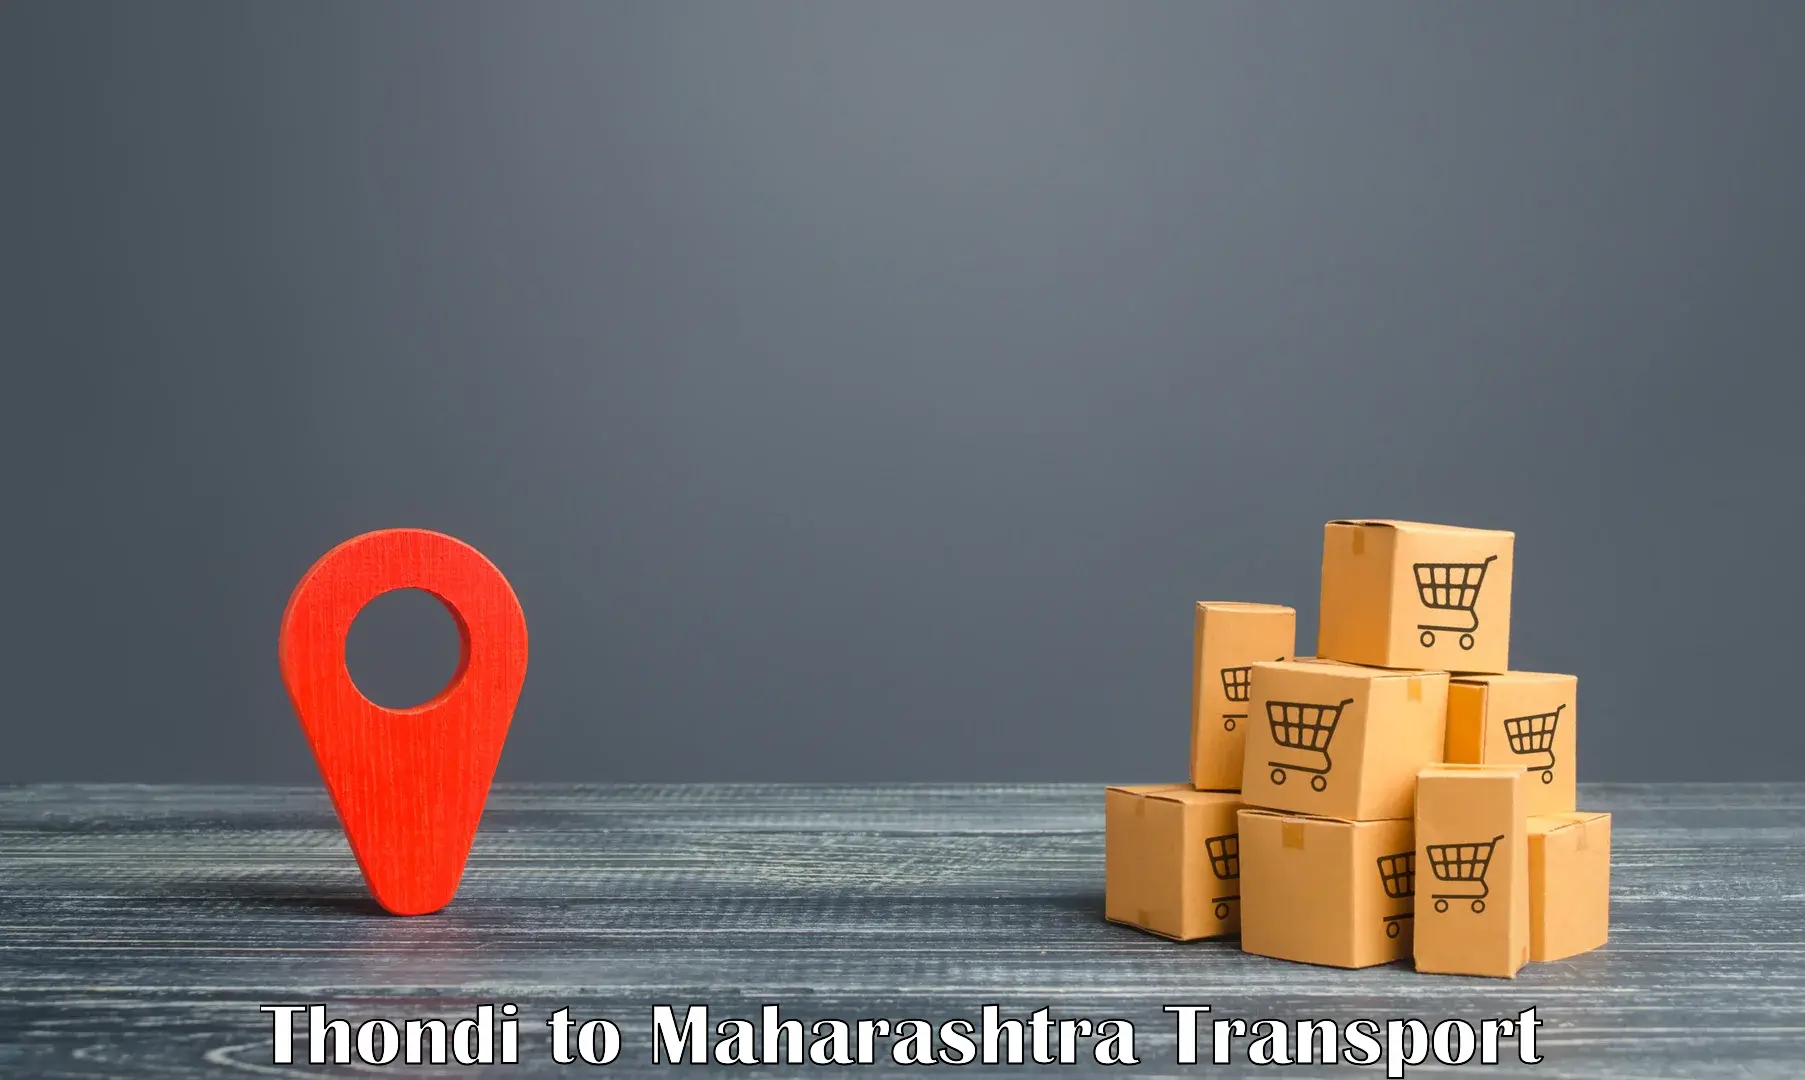 Daily parcel service transport Thondi to Pune